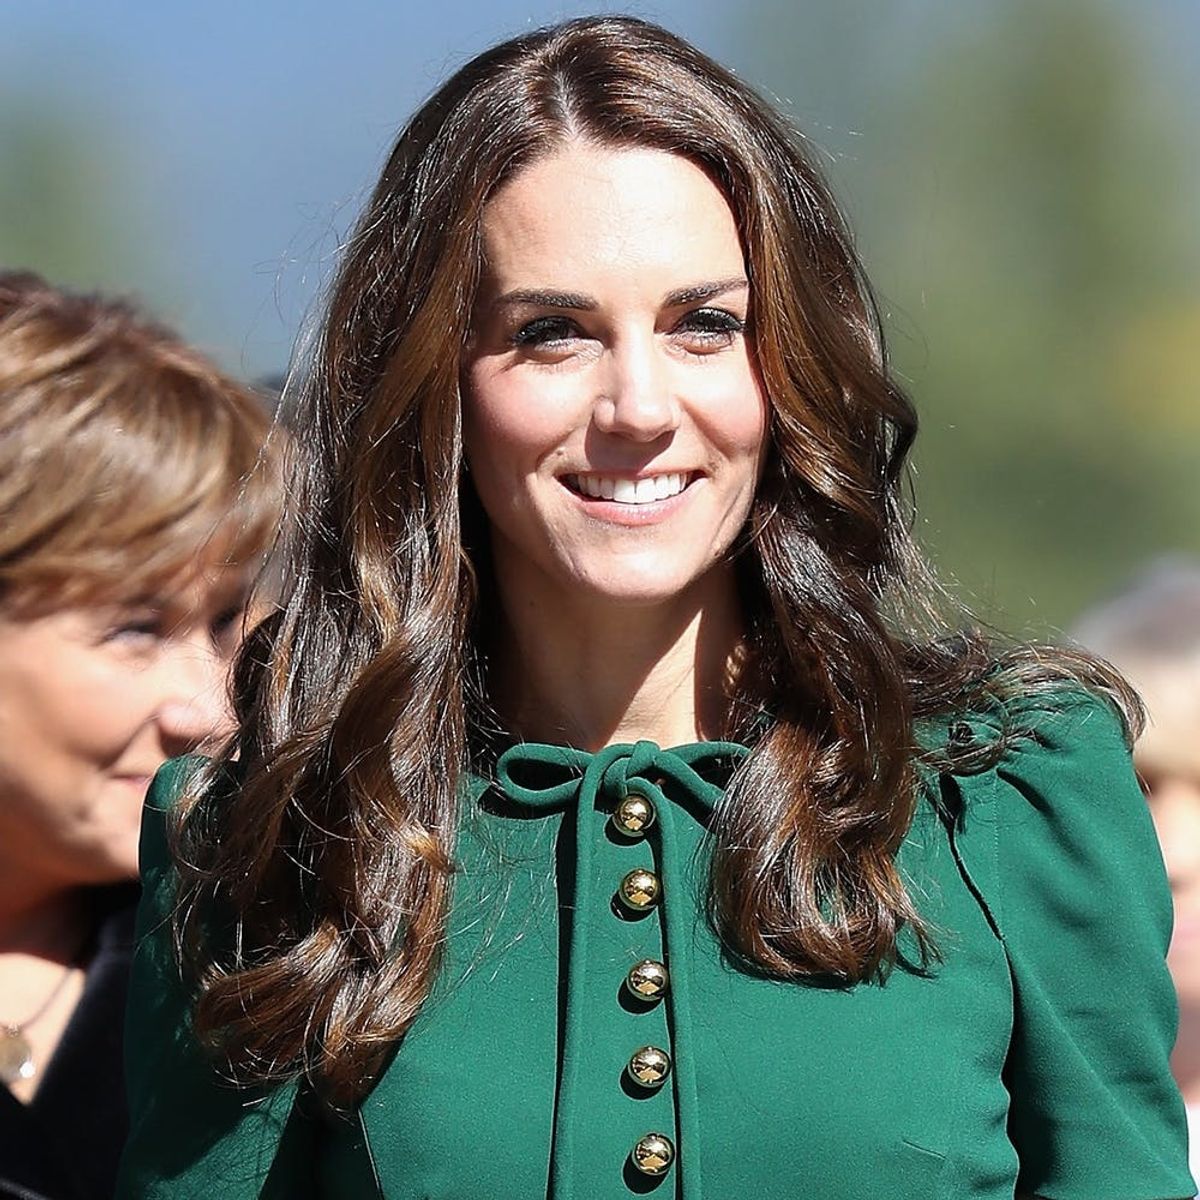 You’ve Got to See Dolce & Gabbana’s Kate Middleton-Inspired Dress